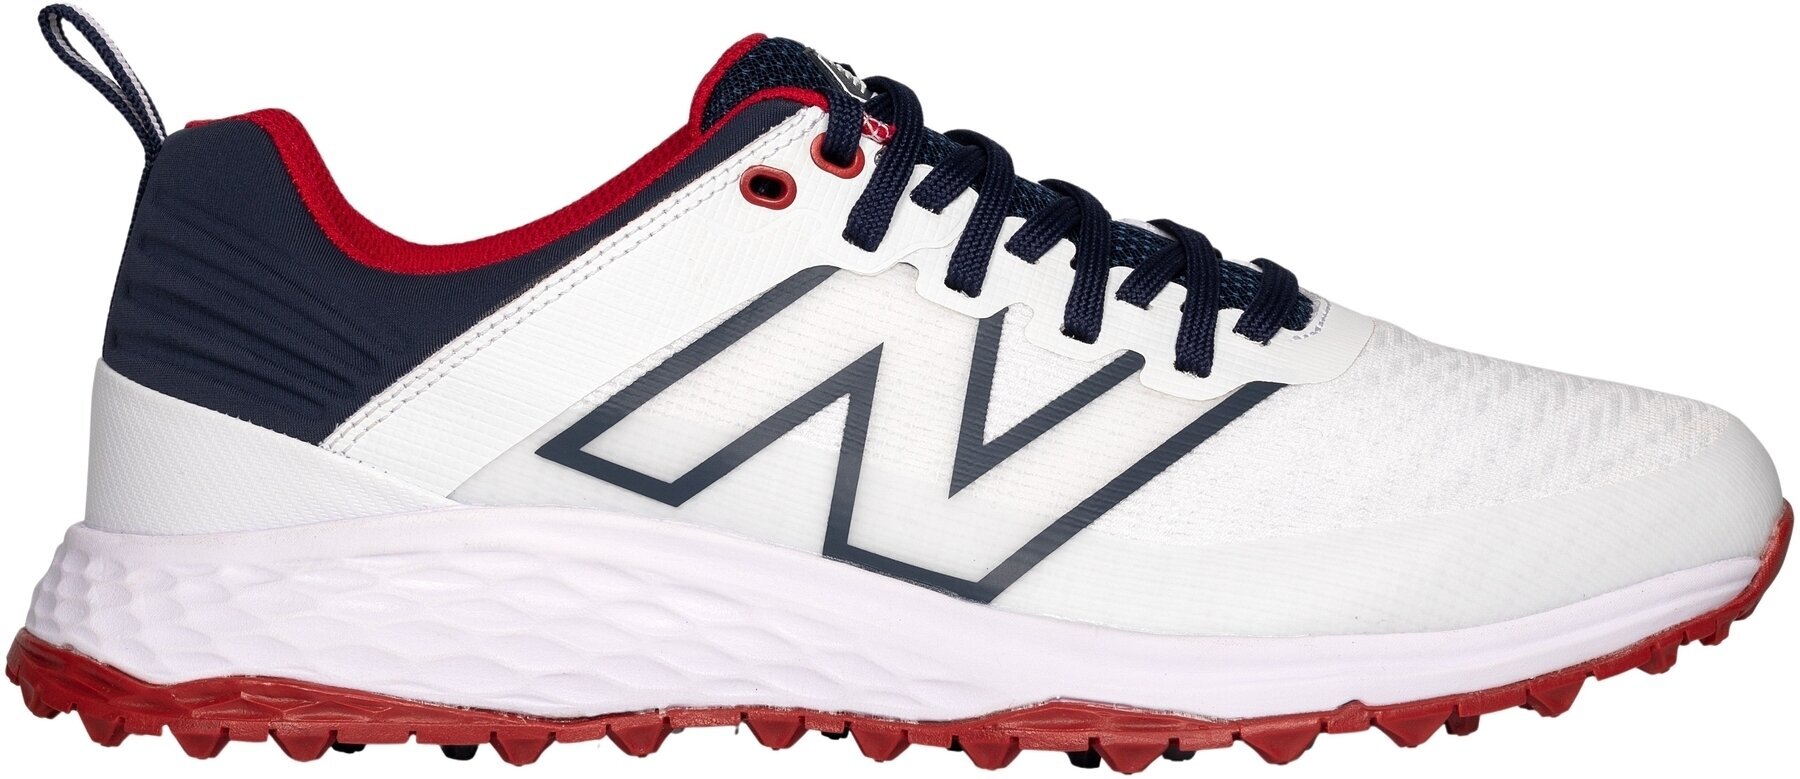 Men's golf shoes New Balance Contend Mens Golf Shoes White/Navy 44